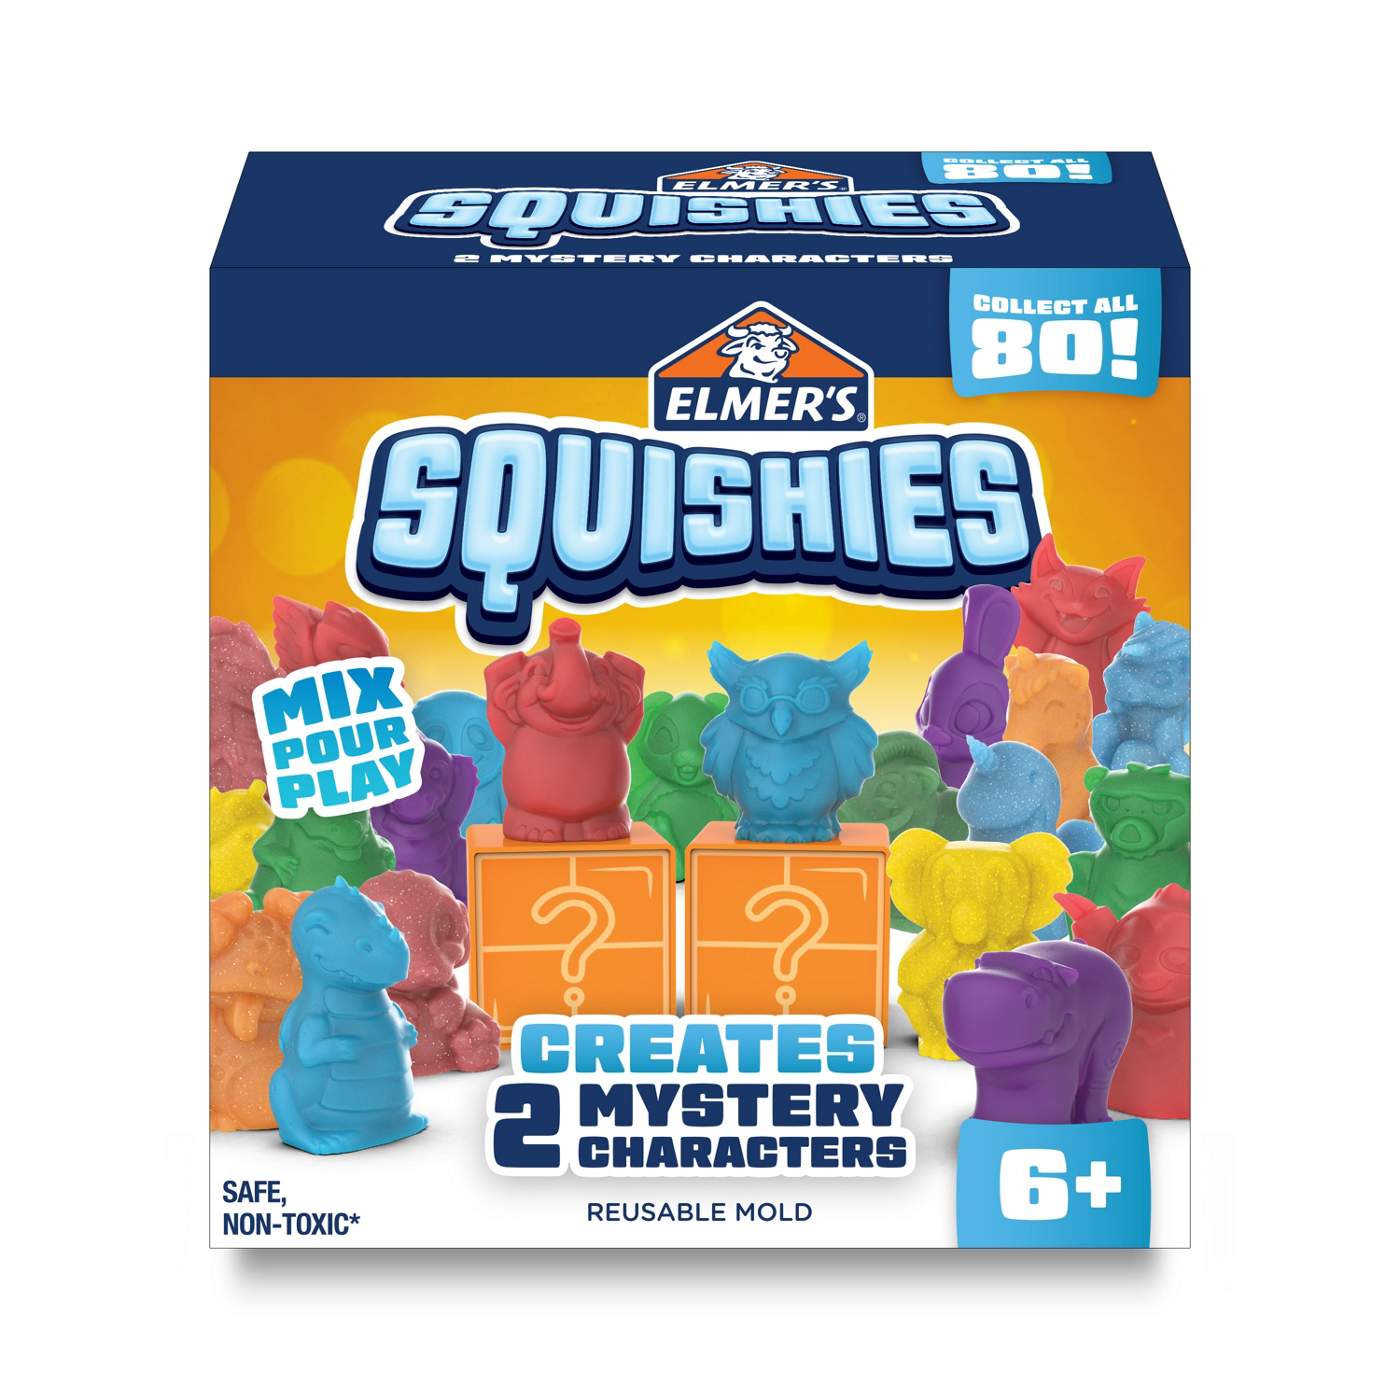 Elmer's Squishies Mystery Character Kit; image 1 of 2